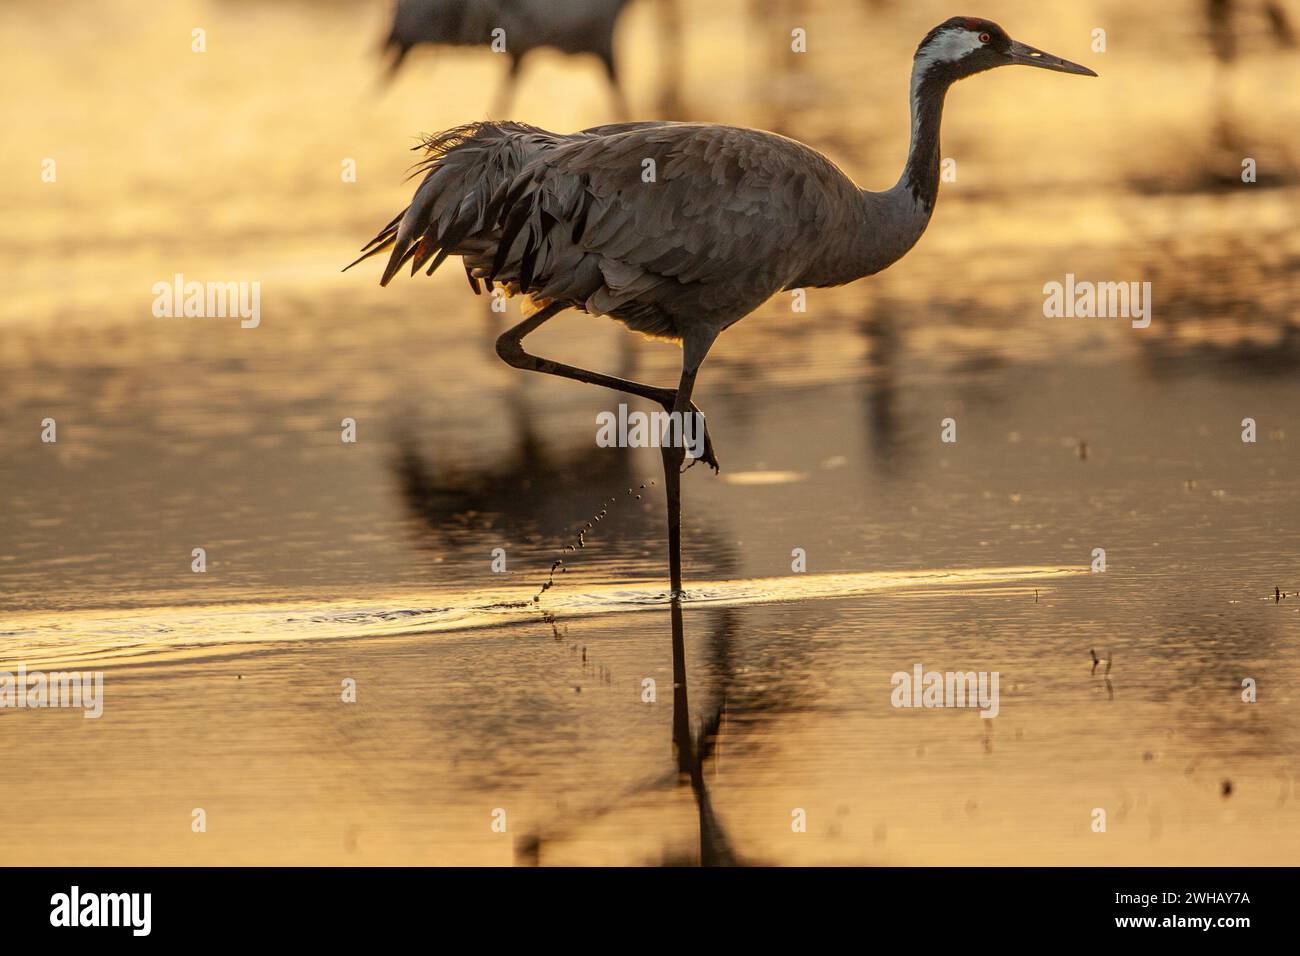 Common crane (Grus grus) Silhouetted in the shallow waters at dawn. Photographed in the Hula Valley, Israel, in February Stock Photo